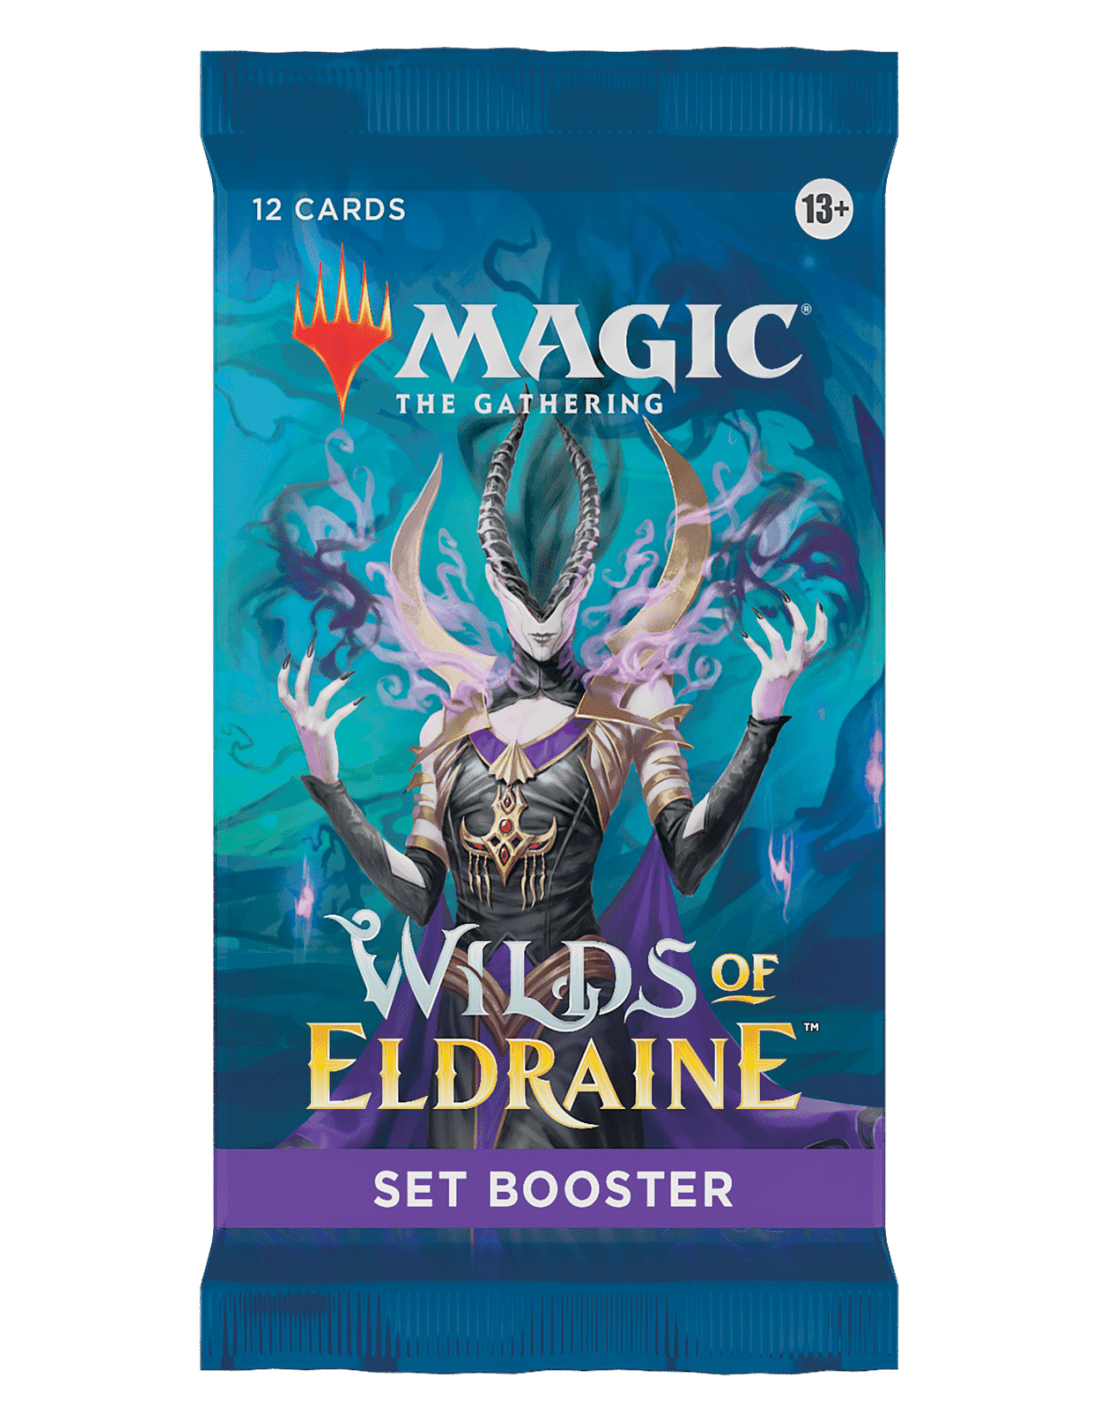 NordicDice Magic: The Gathering Magic the Gathering Wilds of Eldraine Set Booster